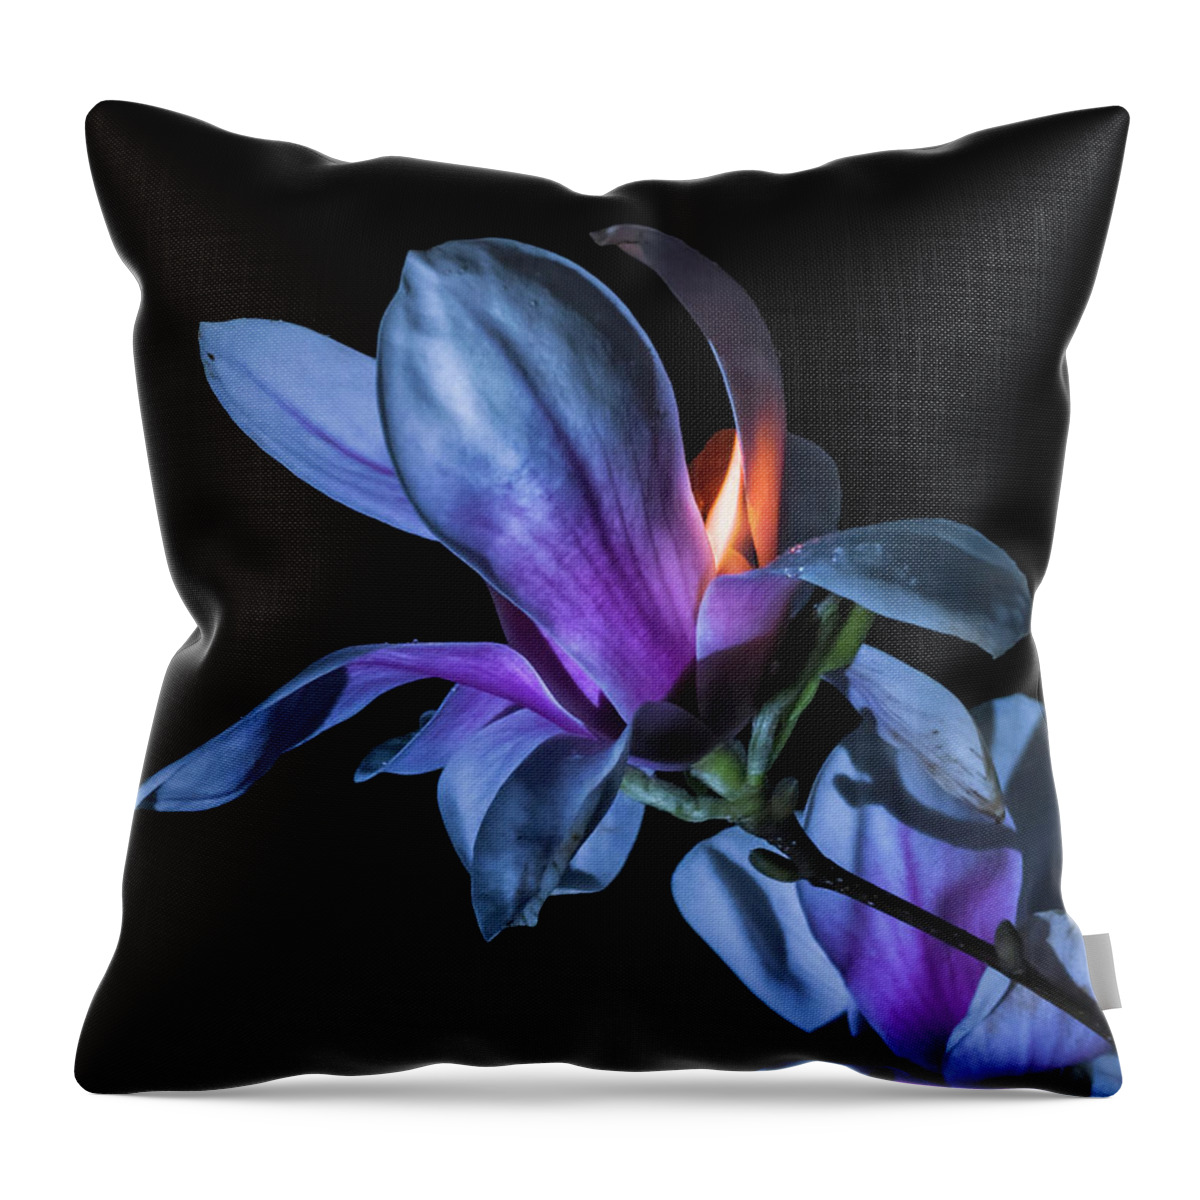 Magnolia Throw Pillow featuring the photograph The Inner Mounting Flame by Jerry LoFaro